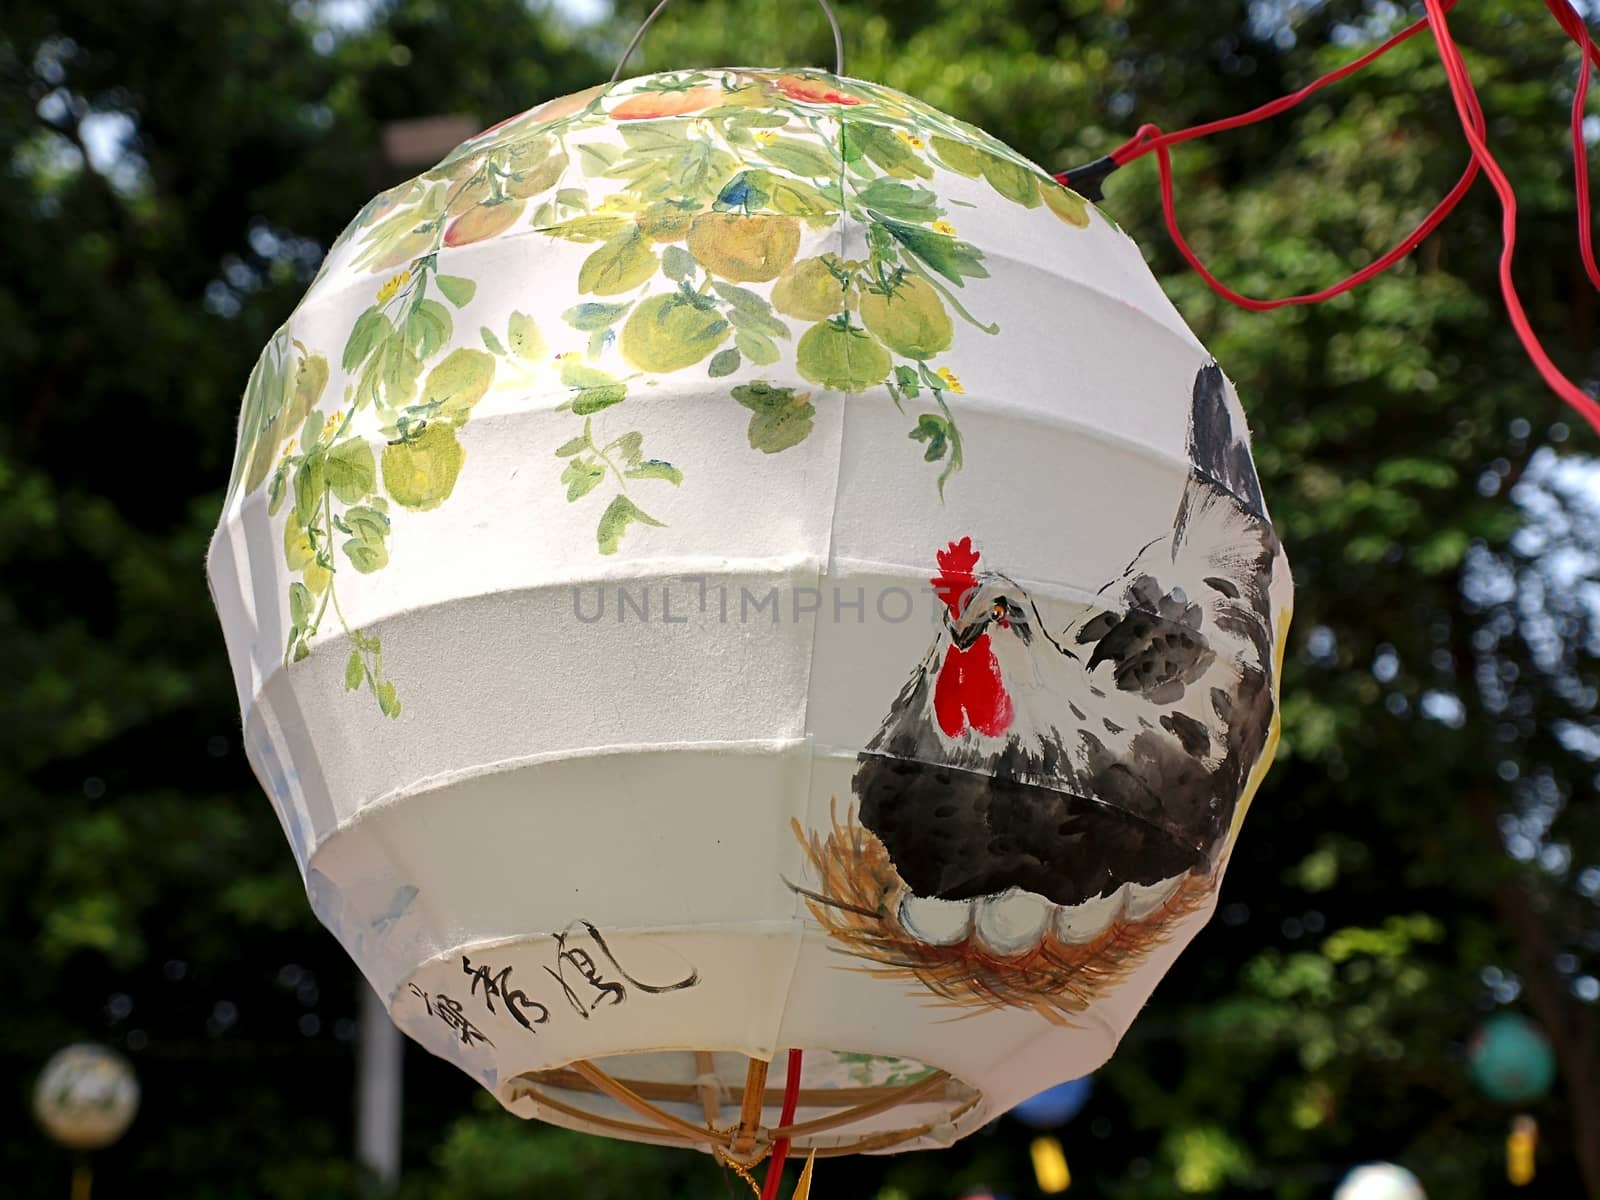 KAOHSIUNG, TAIWAN -- OCTOBER 13: Hand painted Chinese lanterns are on display at the yearly Wannian Folklore Festival on October 13, 2013 in Kaohsiung.
